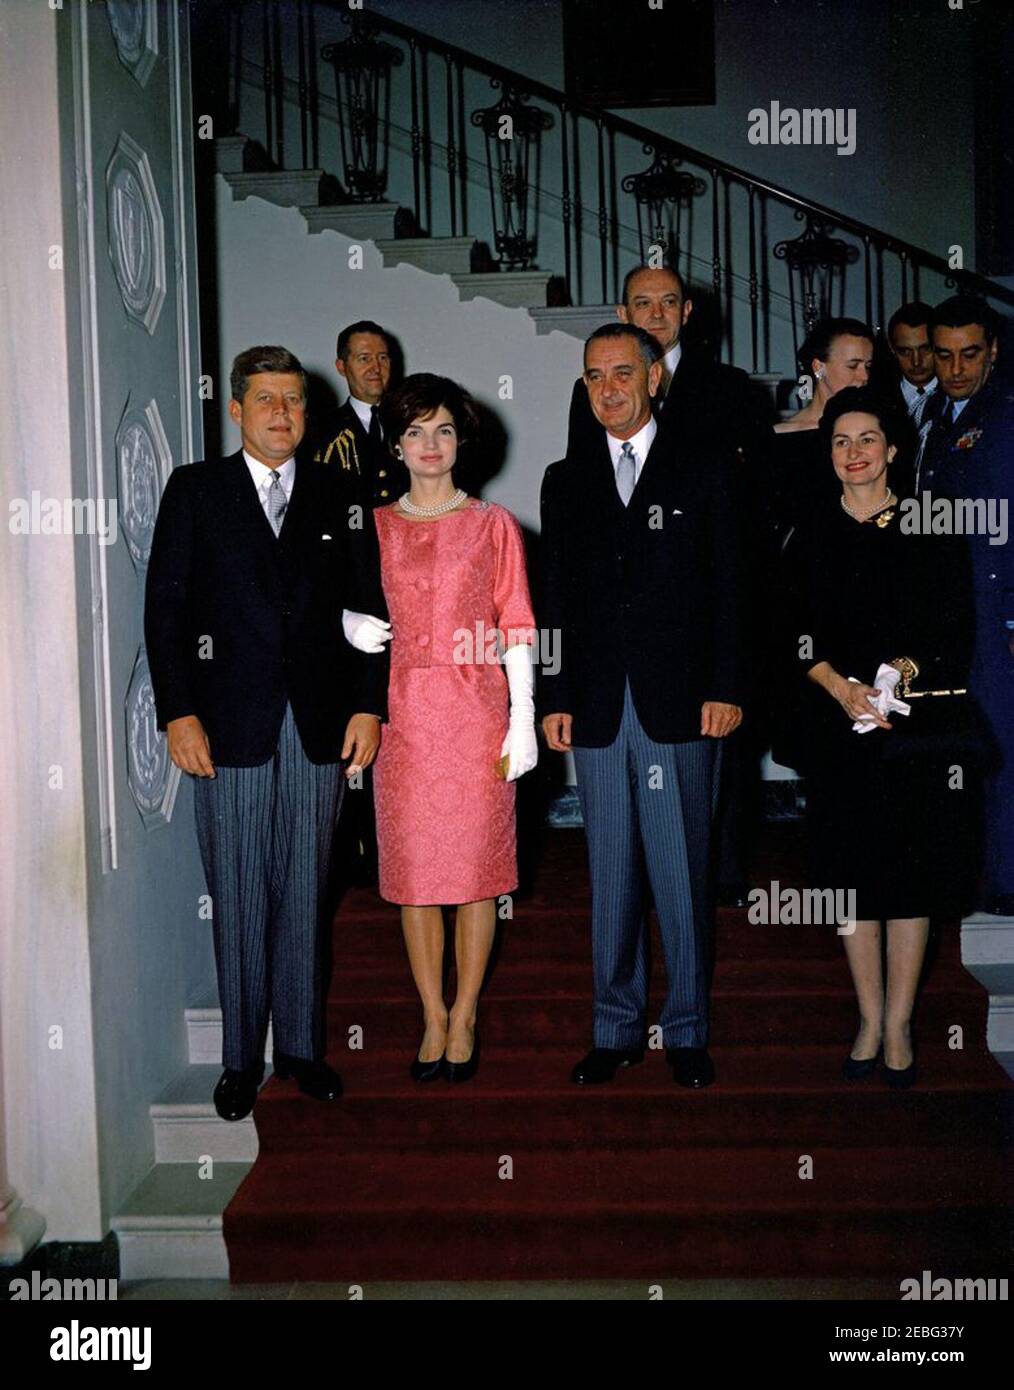 Reception for members of the Diplomatic Corps, 5:00PM. Reception for members of the Diplomatic Corps, White House, Washington, D.C. President John F. Kennedy and First Lady Jacqueline Kennedy, with Vice President Lyndon B. Johnson and Lady Bird Johnson, descend the Grand Staircase to the Entrance Hall. Behind them (L-R) are Military Aide to the President General Chester V. Clifton; Secretary of State Dean Rusk and wife Virginia Rusk; Naval Aide to the President Commander Tazewell Shepard, Jr.; Air Force Aide to the President General Godfrey McHugh. Stock Photo